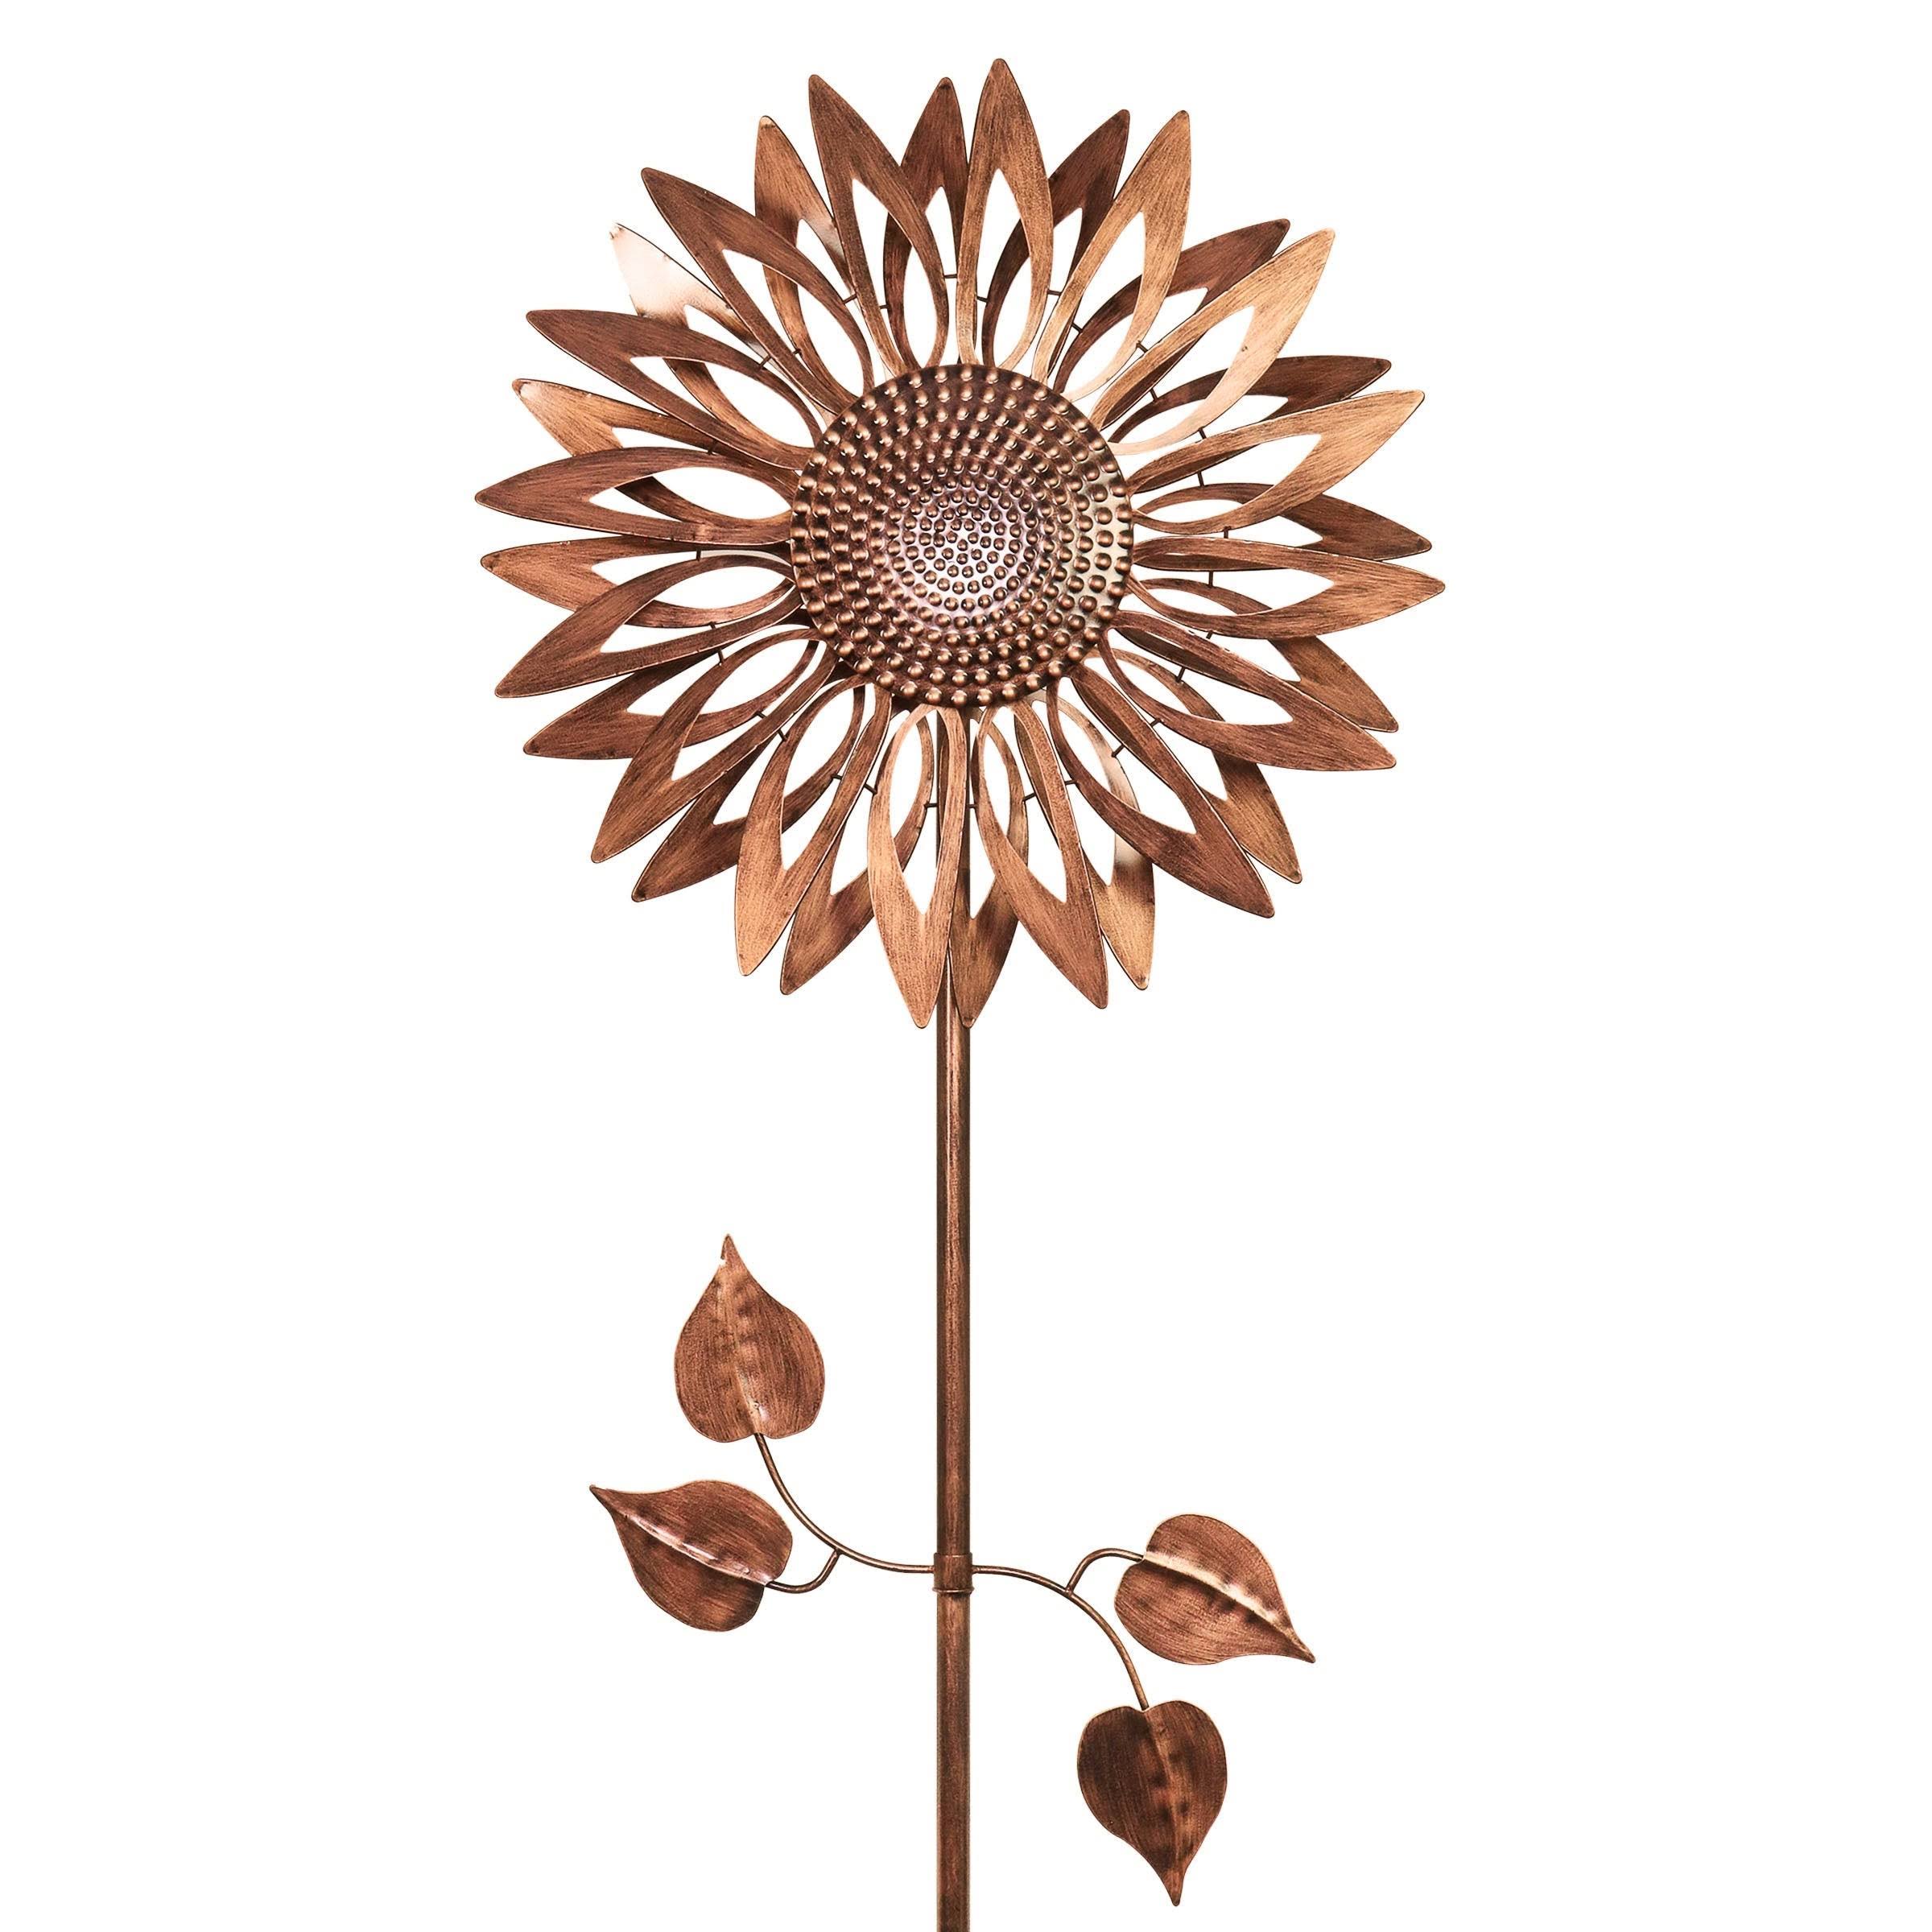 Exhart Dual Spinning Kinetic Bronze Sunflower Garden Stake in Metal - Large